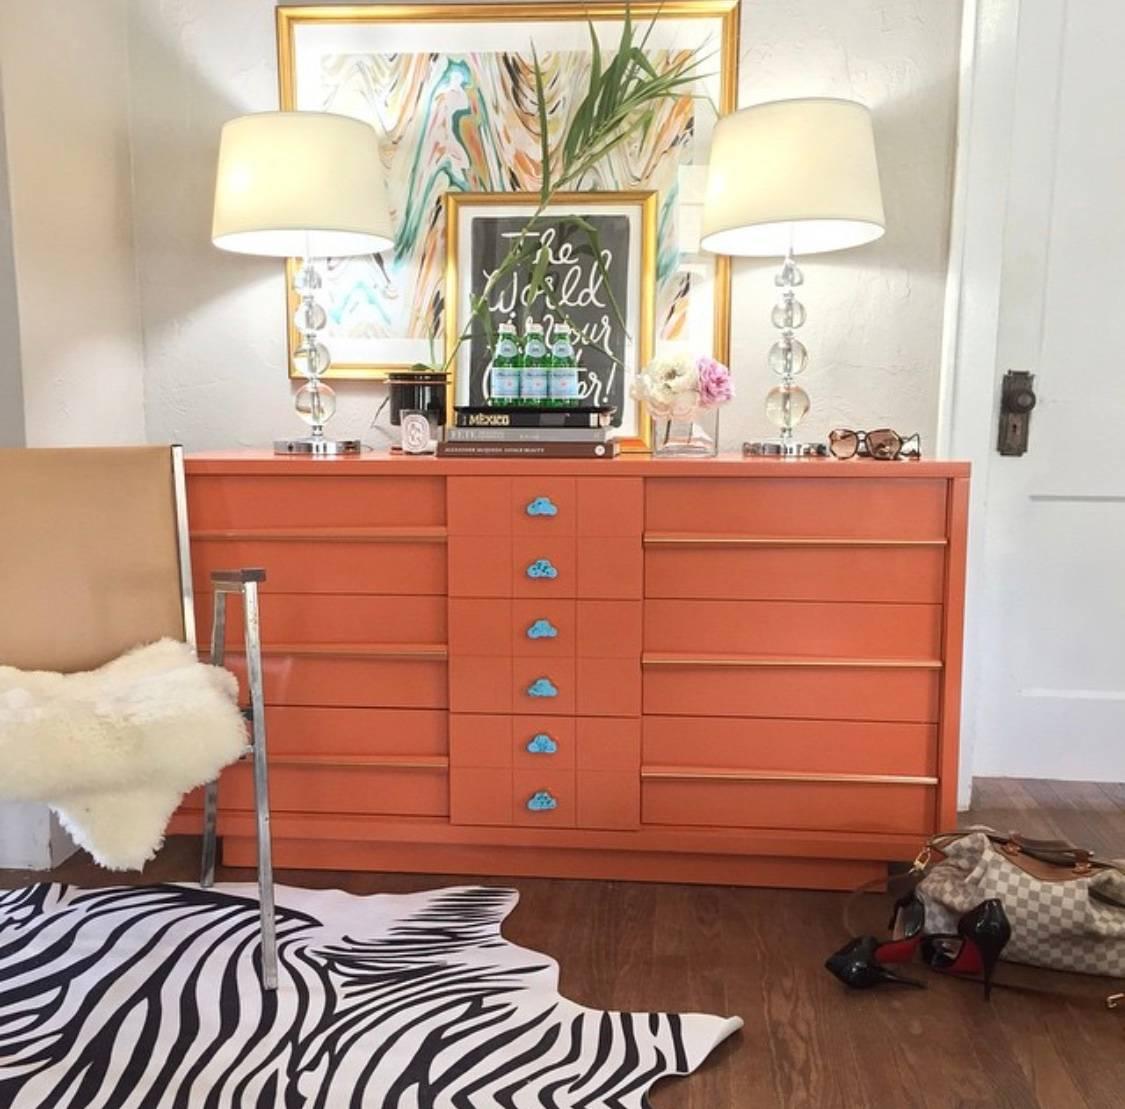 American Mid-Century Orange Lacquered Credenza or Dresser with Turquoise and Brass Pulls